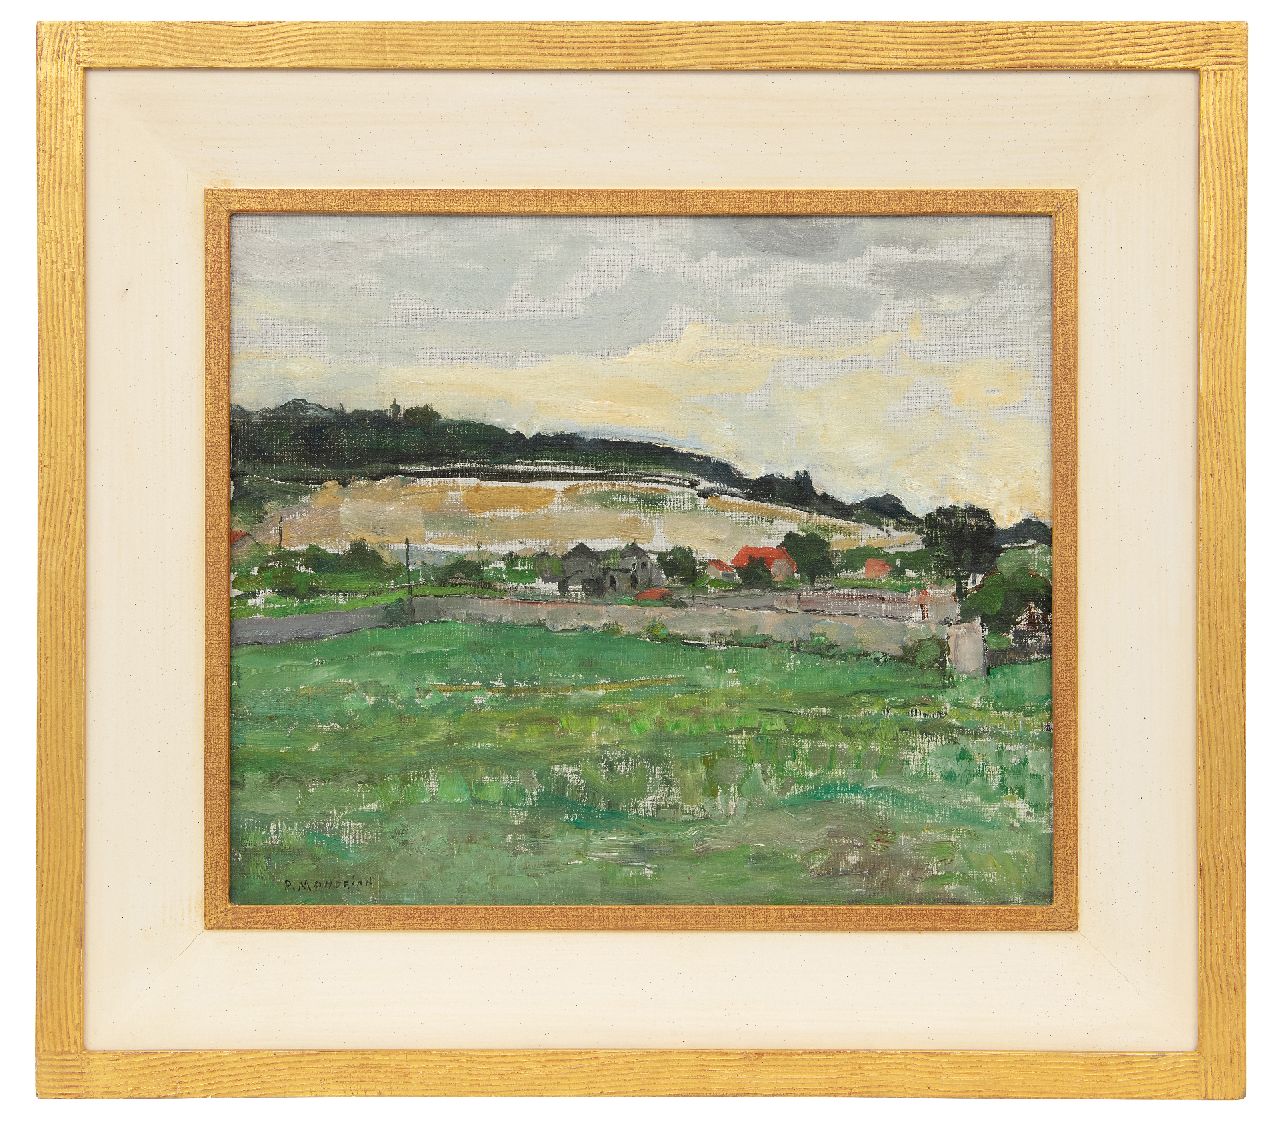 Mondriaan P.C.  | Pieter Cornelis 'Piet' Mondriaan | Paintings offered for sale | Landscape at Montmorency, oil on canvas 46.3 x 55.2 cm, signed l.r. and on the reverse and dated on the reverse 8 Aug. '30